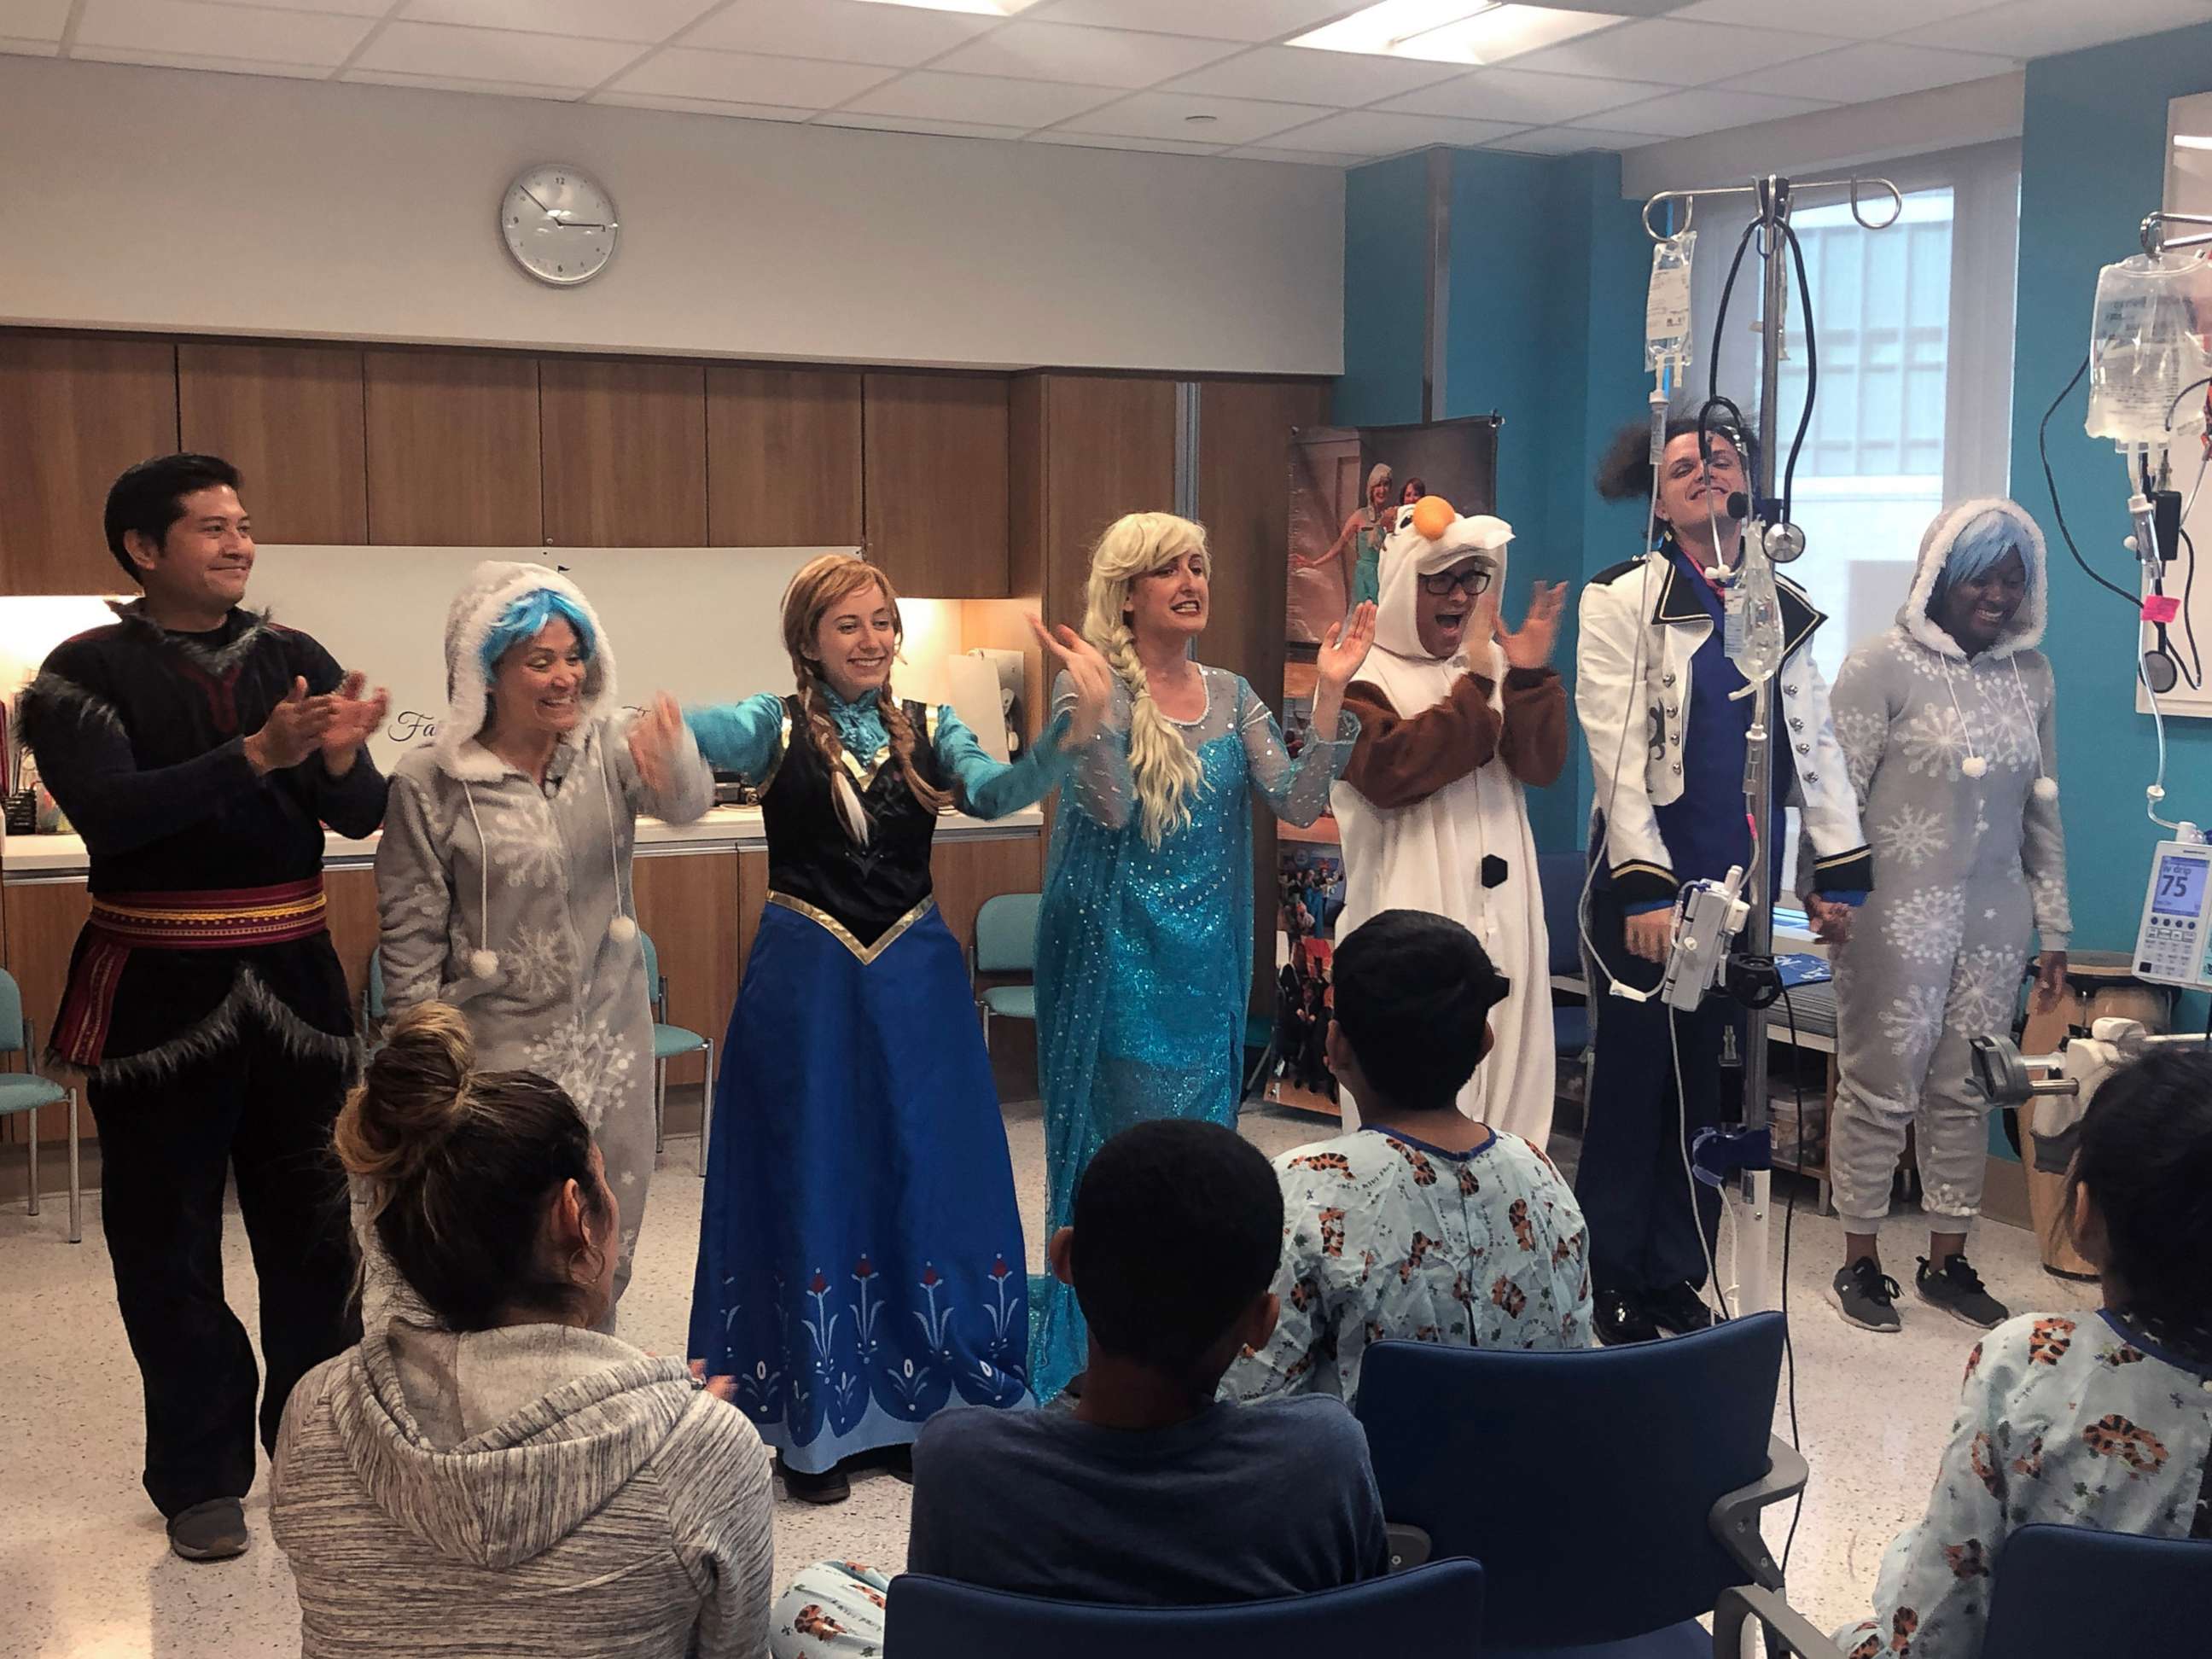 PHOTO: Fairytale Physical Therapy performers take a bow after their performance at New York Presbyterian Hospital.